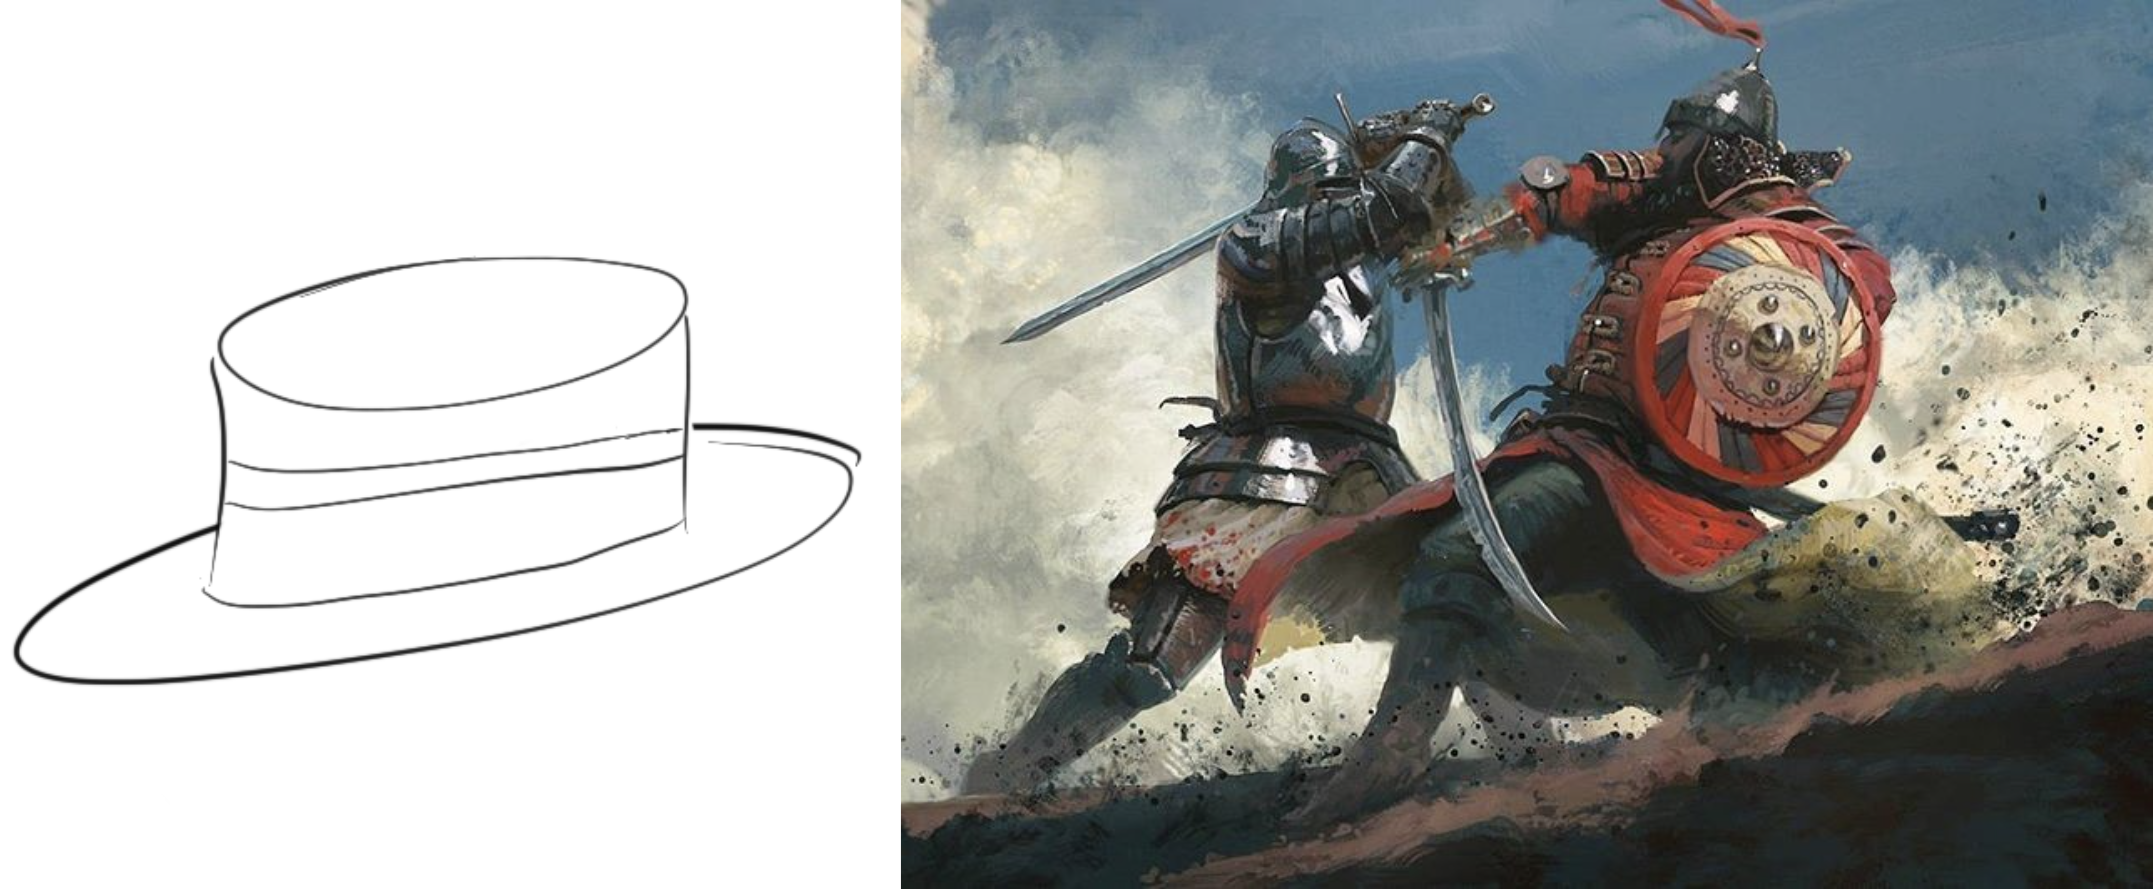 Left: a shitty practice drawing of a hat I made a while ago. Right: a gorgeous piece from Kingdom Come: Deliverance